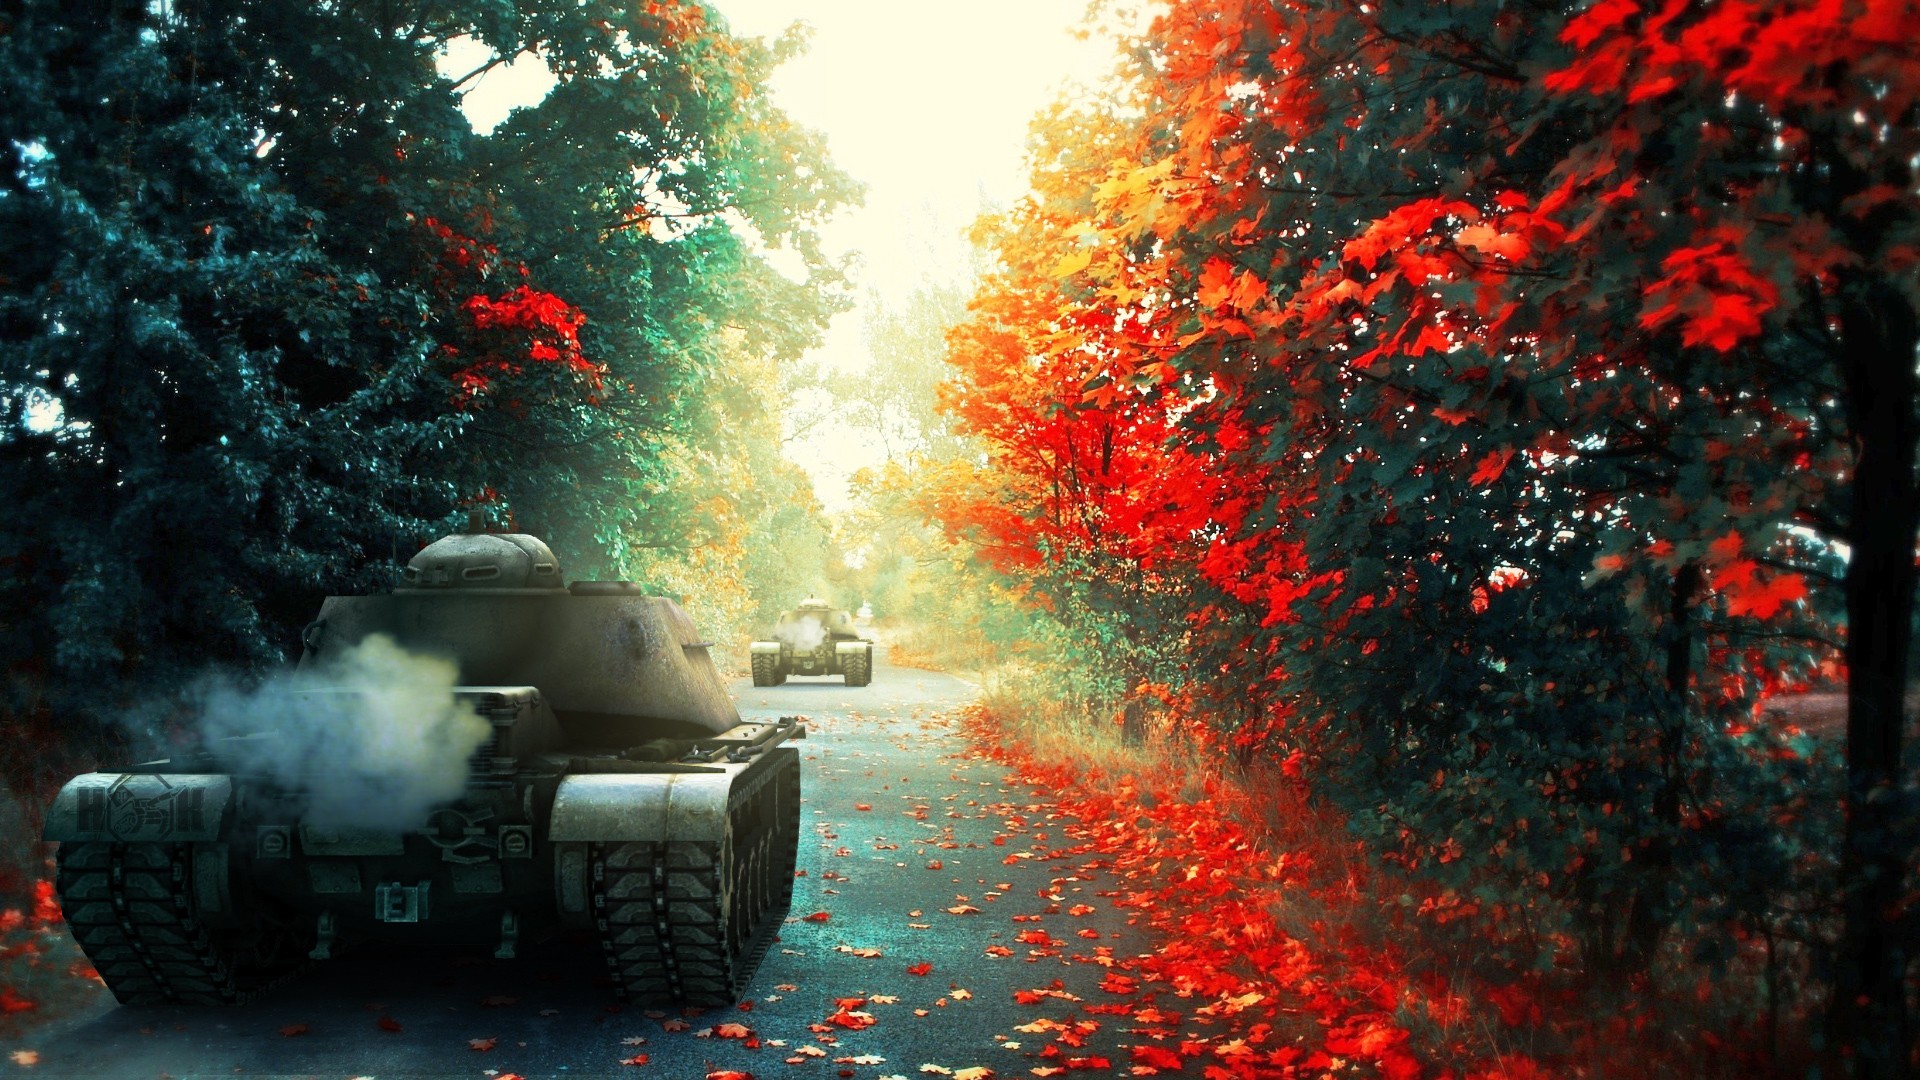 General 1920x1080 World of Tanks tank wargaming video games T110E4 fallen leaves vehicle red leaves